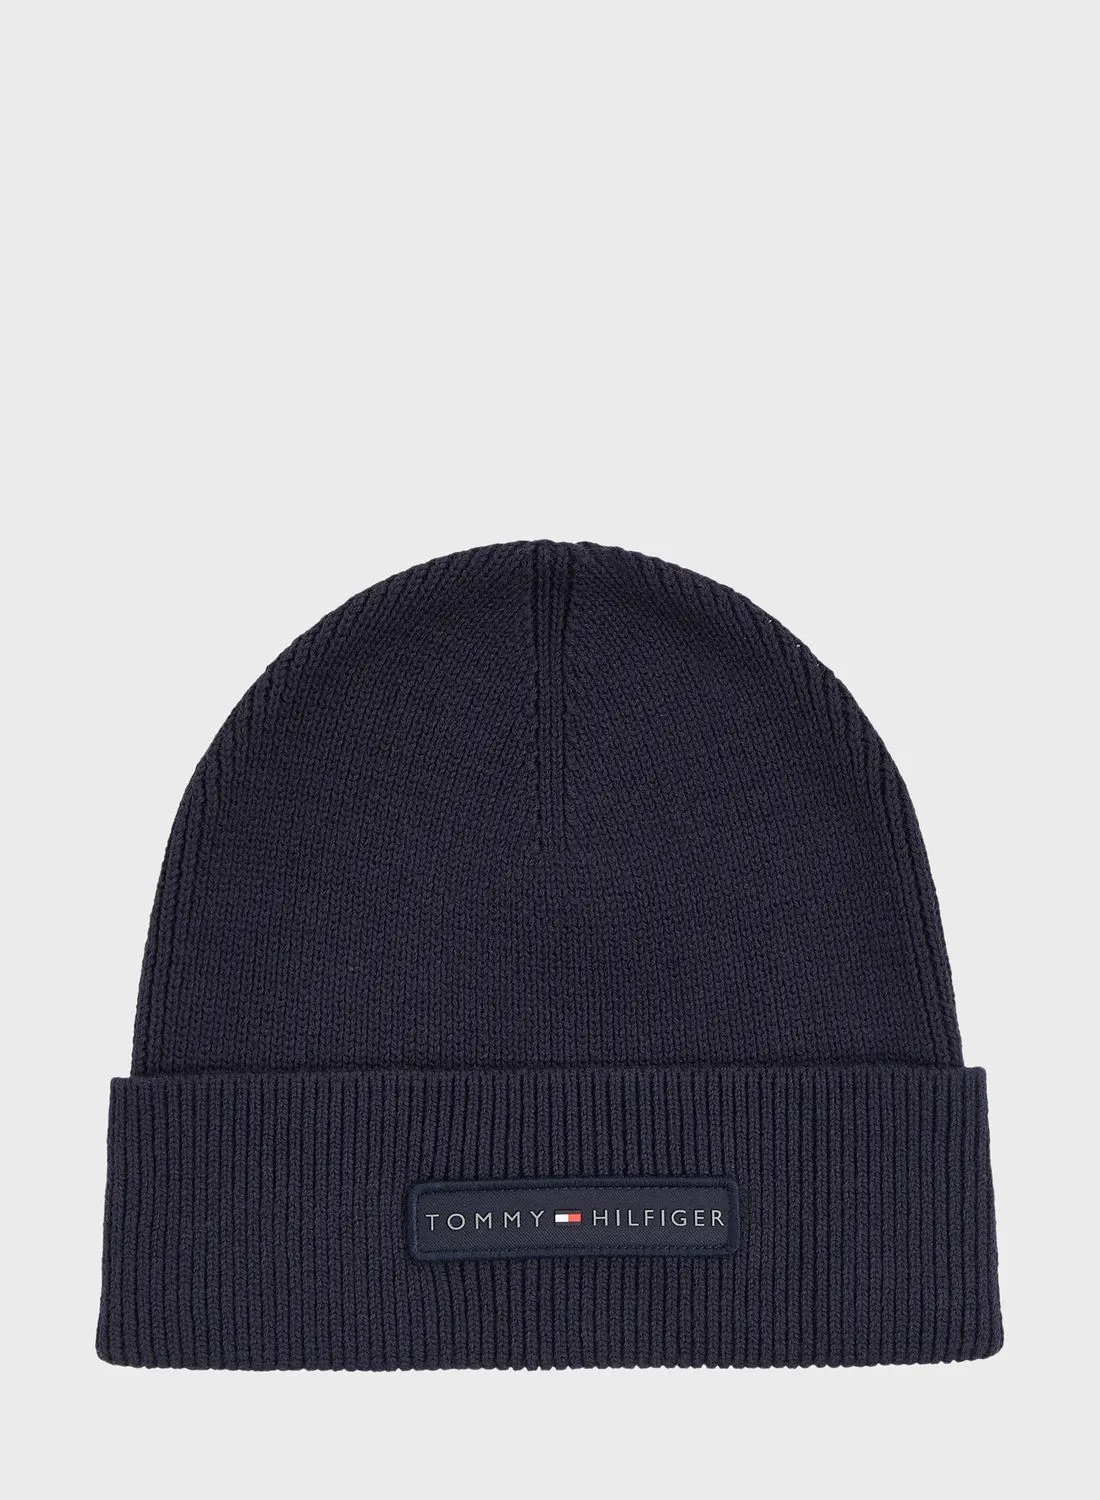 TOMMY HILFIGER Logo Knitted Beanie